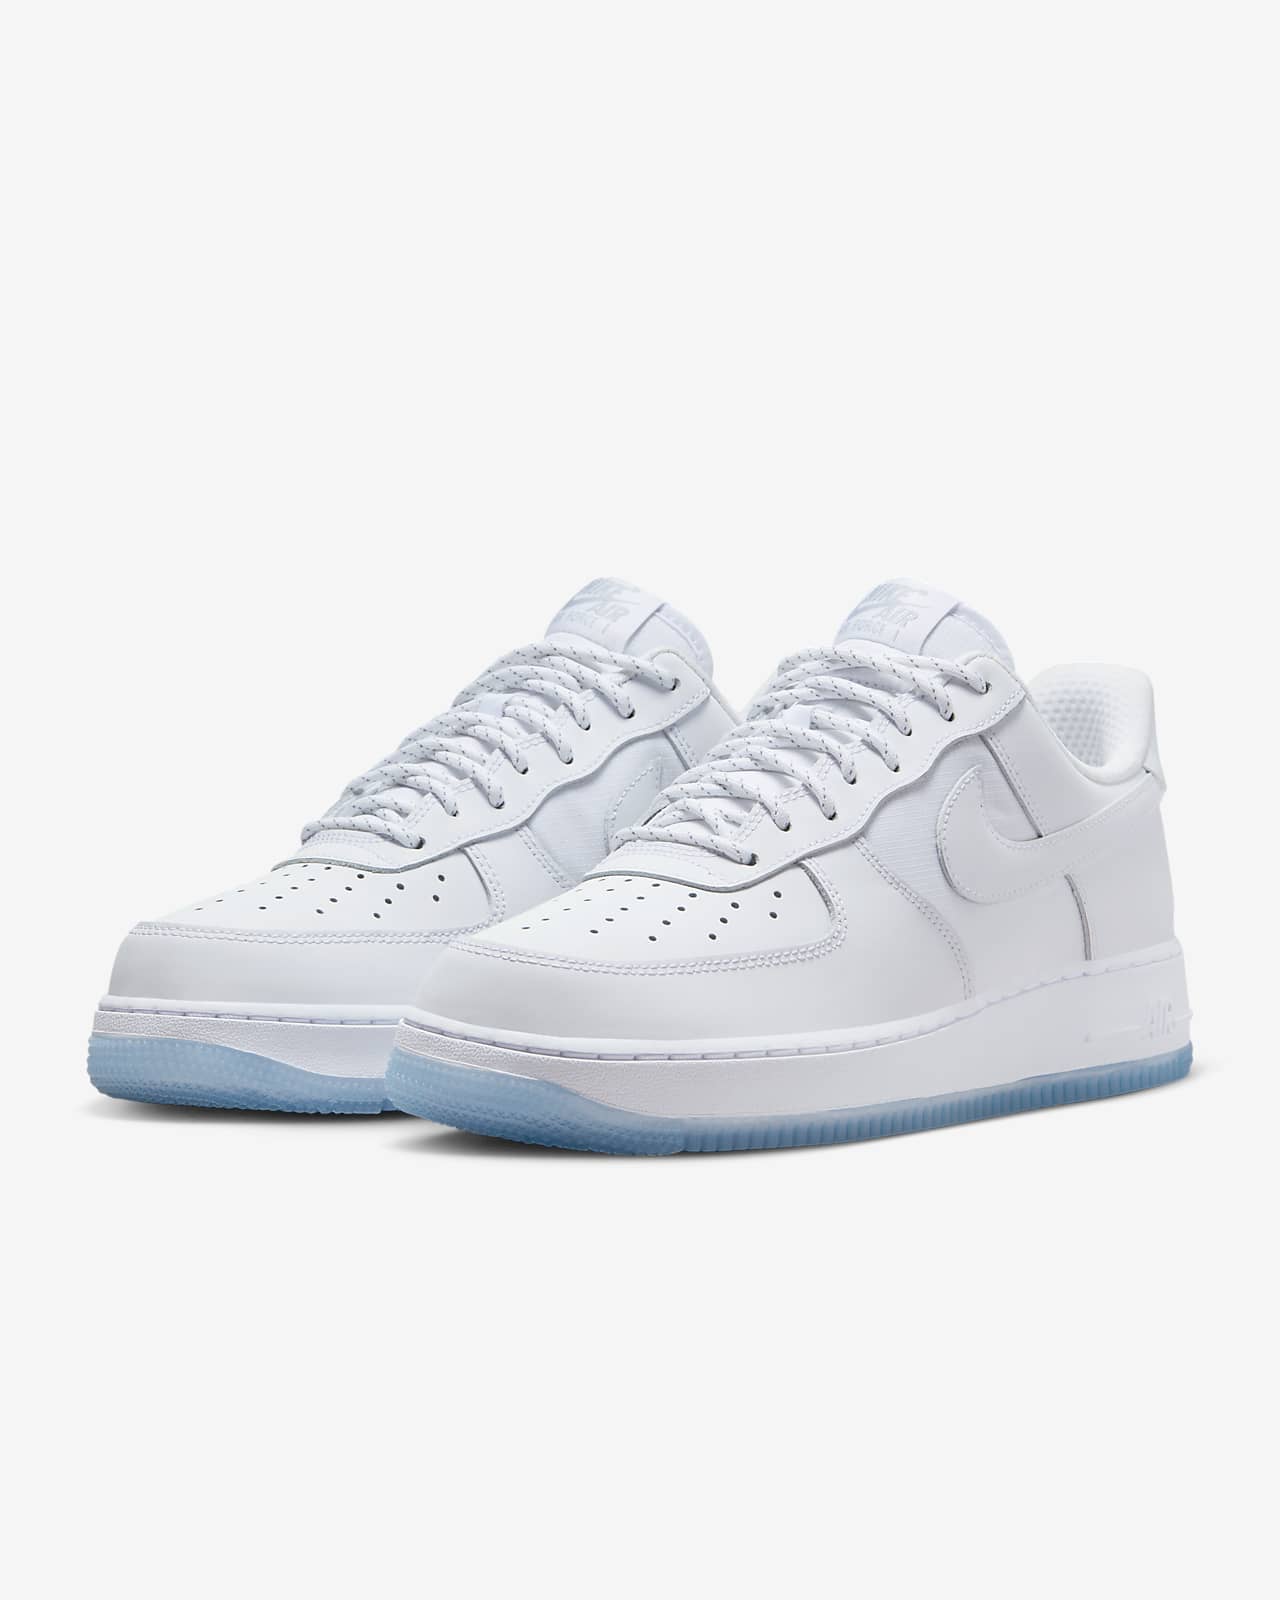 Air Force 1 Trainers. Nike HR